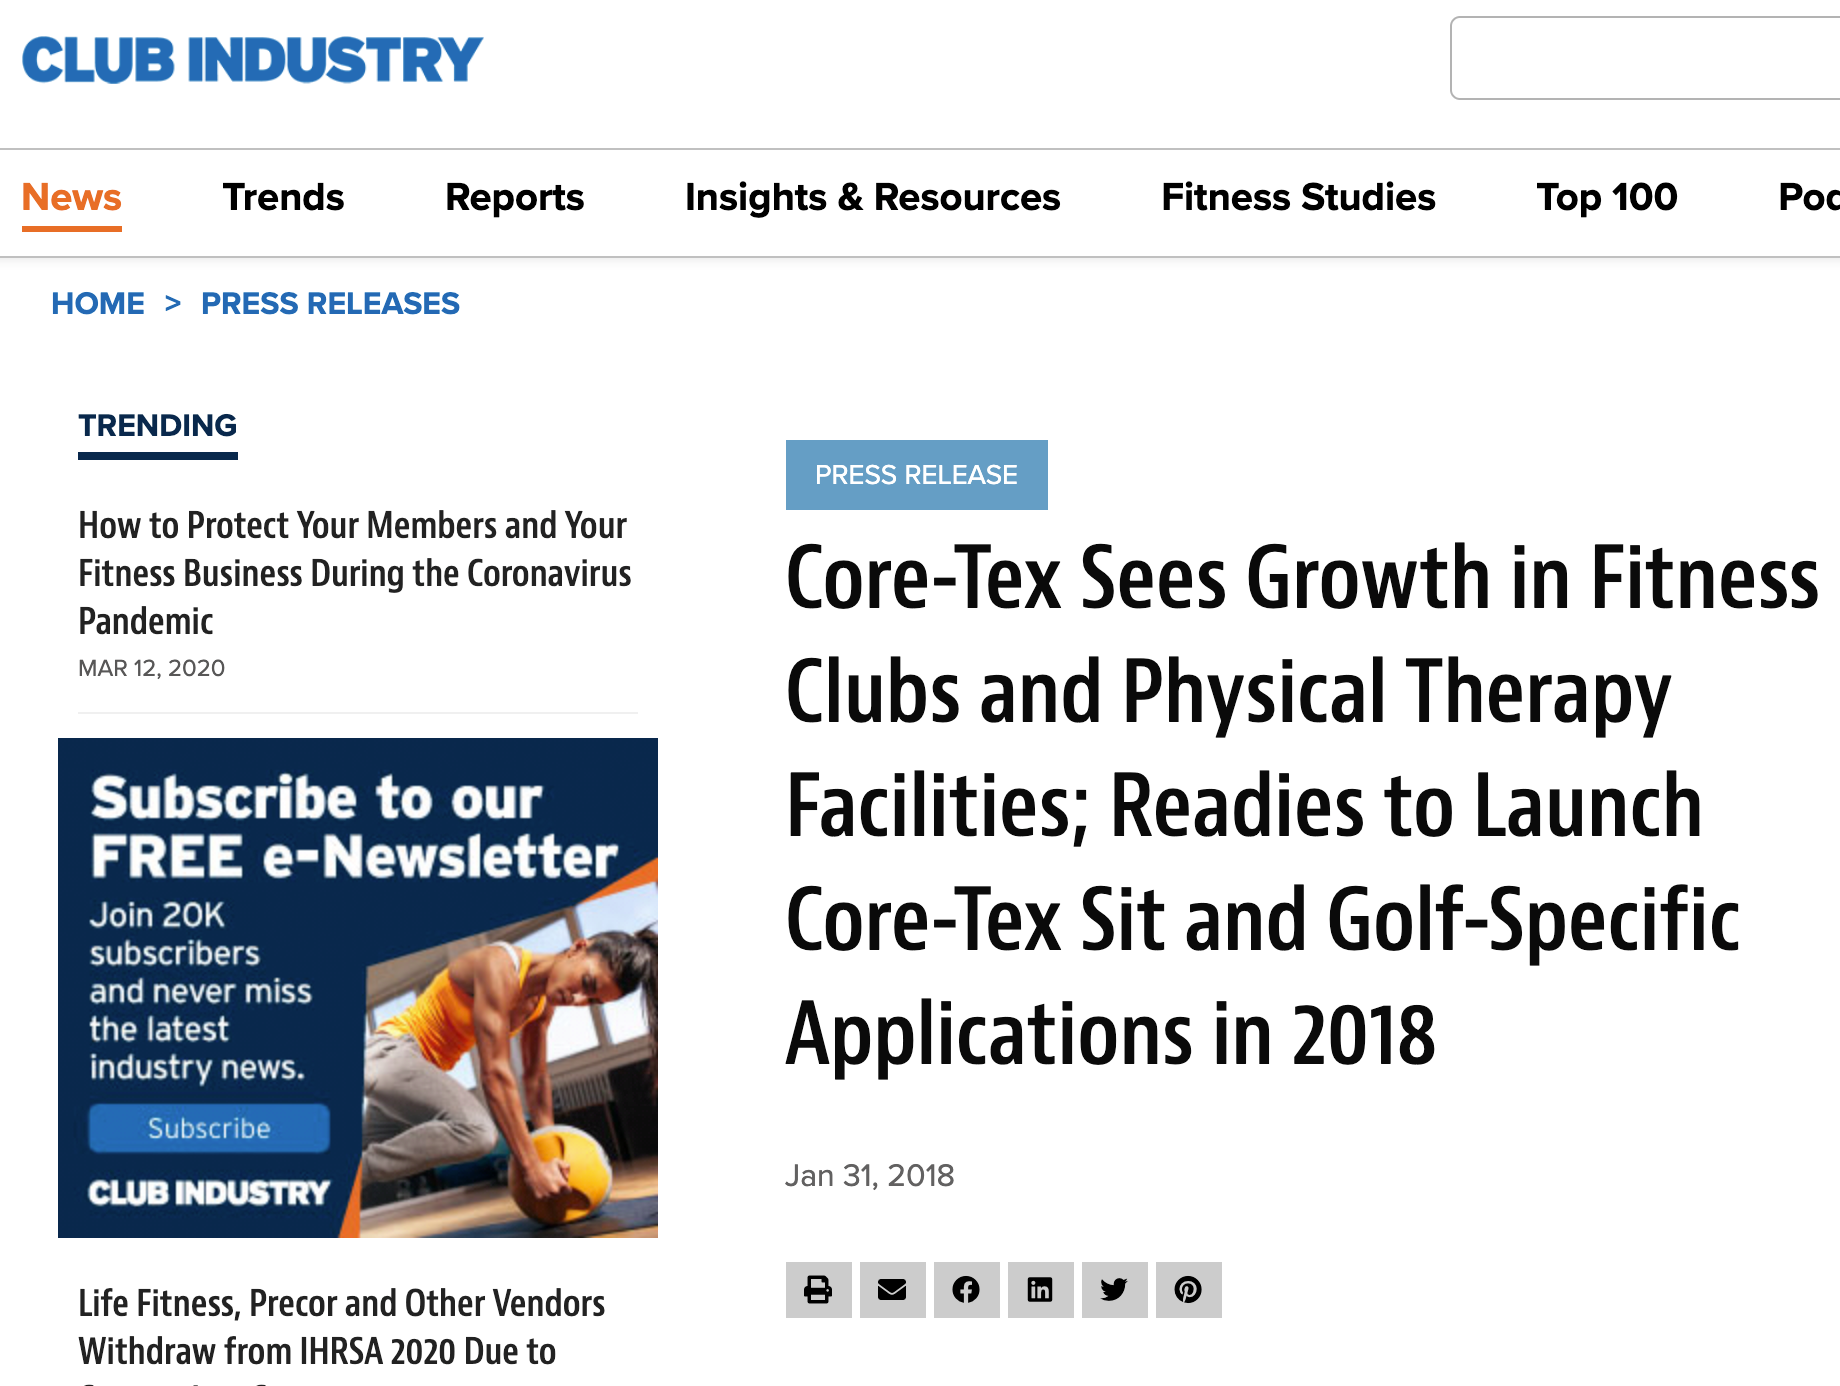 CLUB INDUSTRY MAGAZINE, JANUARY 2018: Core-Tex Sees Growth in Fitness Clubs and Physical Therapy Facilities; Readies to Launch Core-Tex Sit and Golf-Specific Applications in 2018